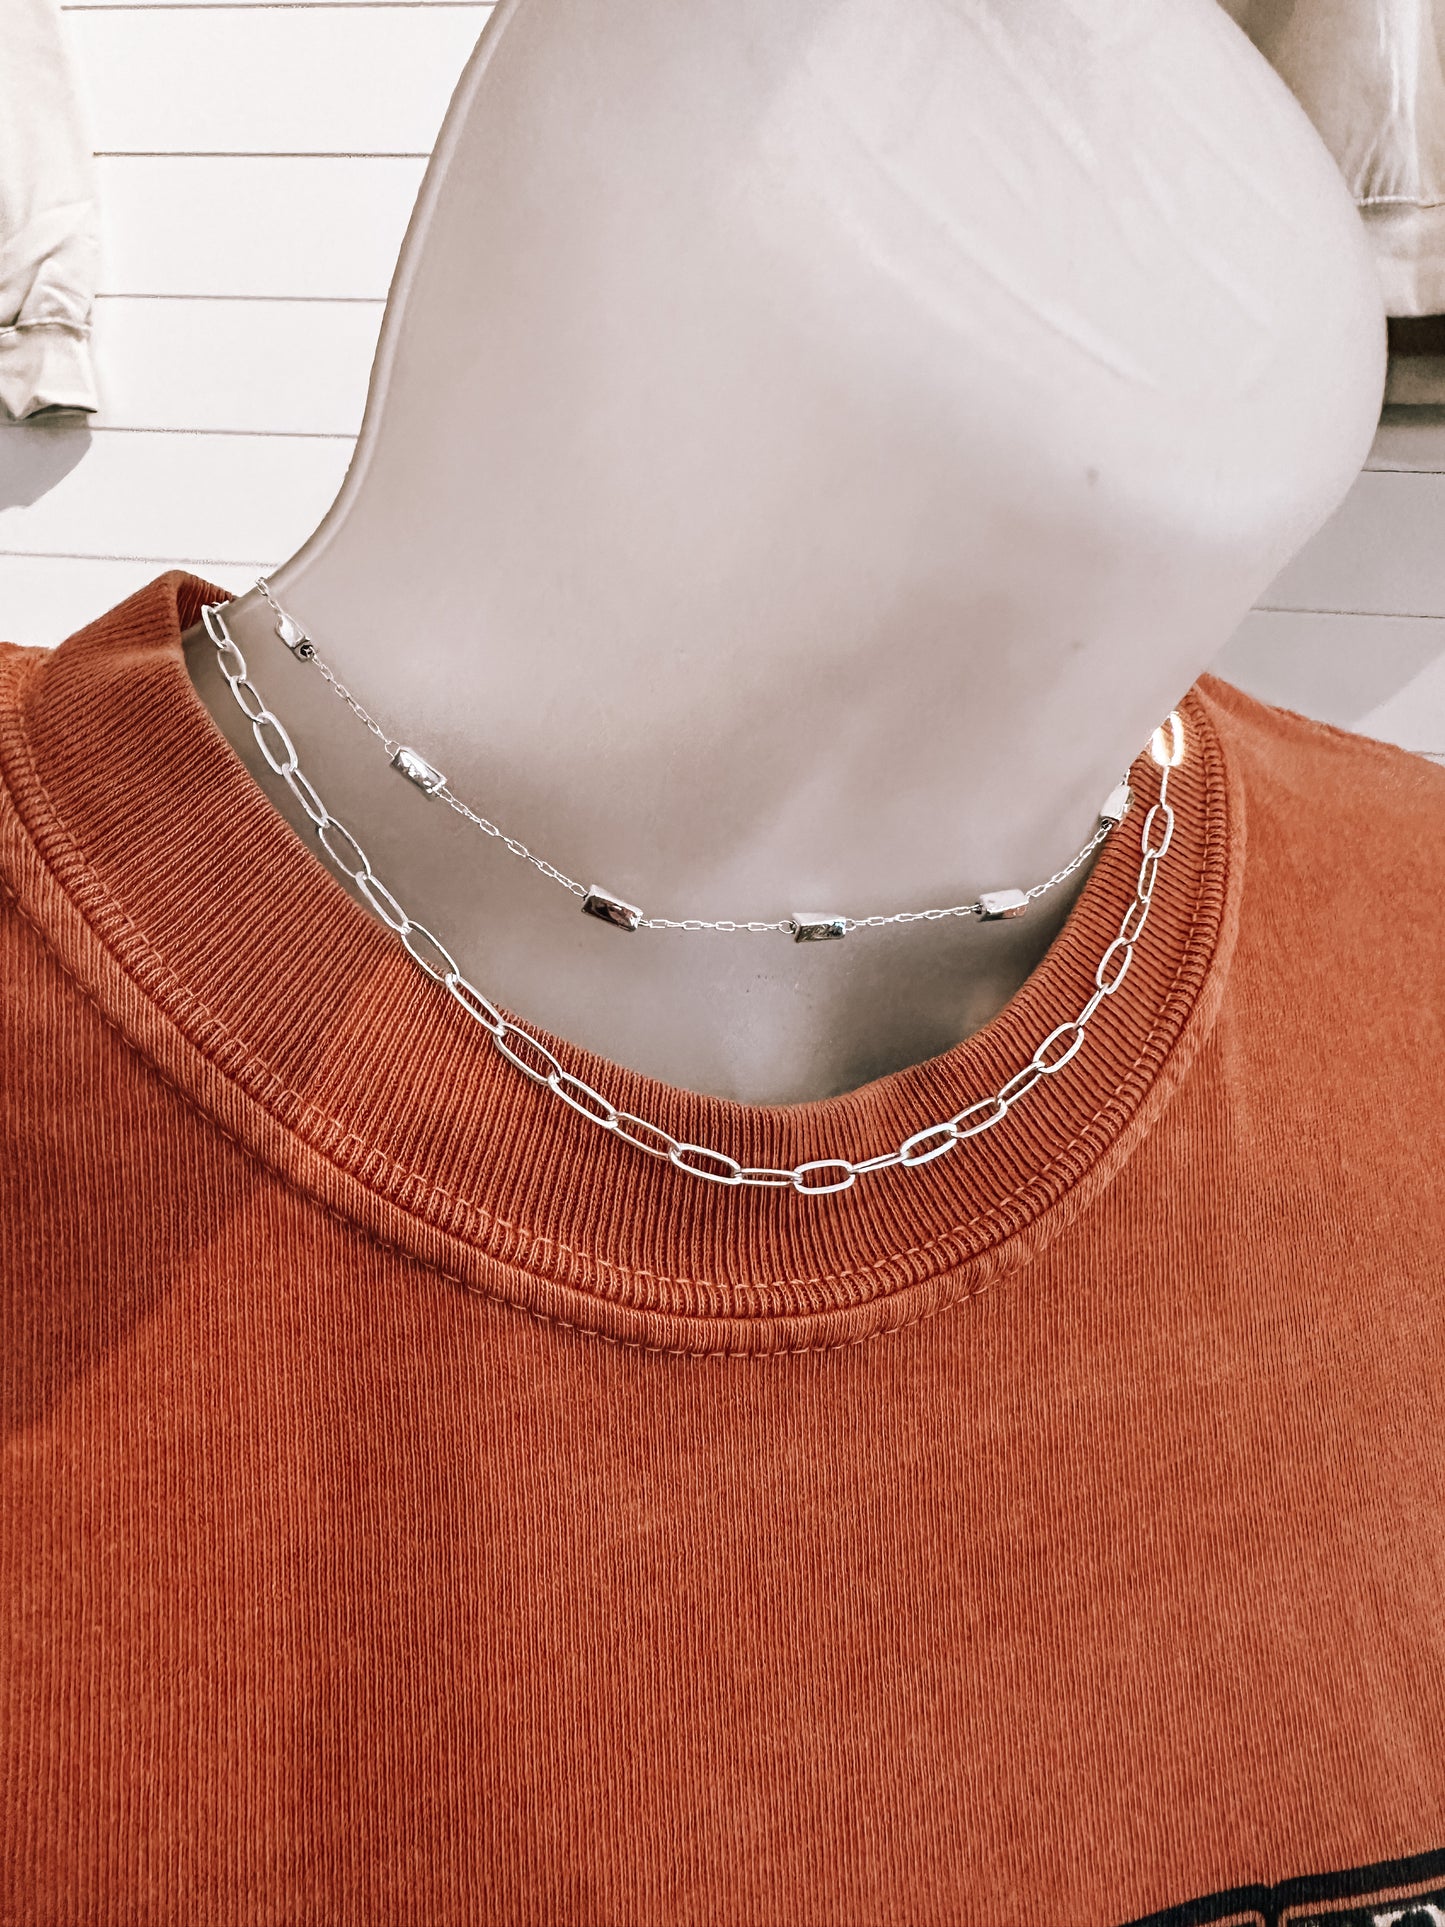 The Layered Silver Necklace